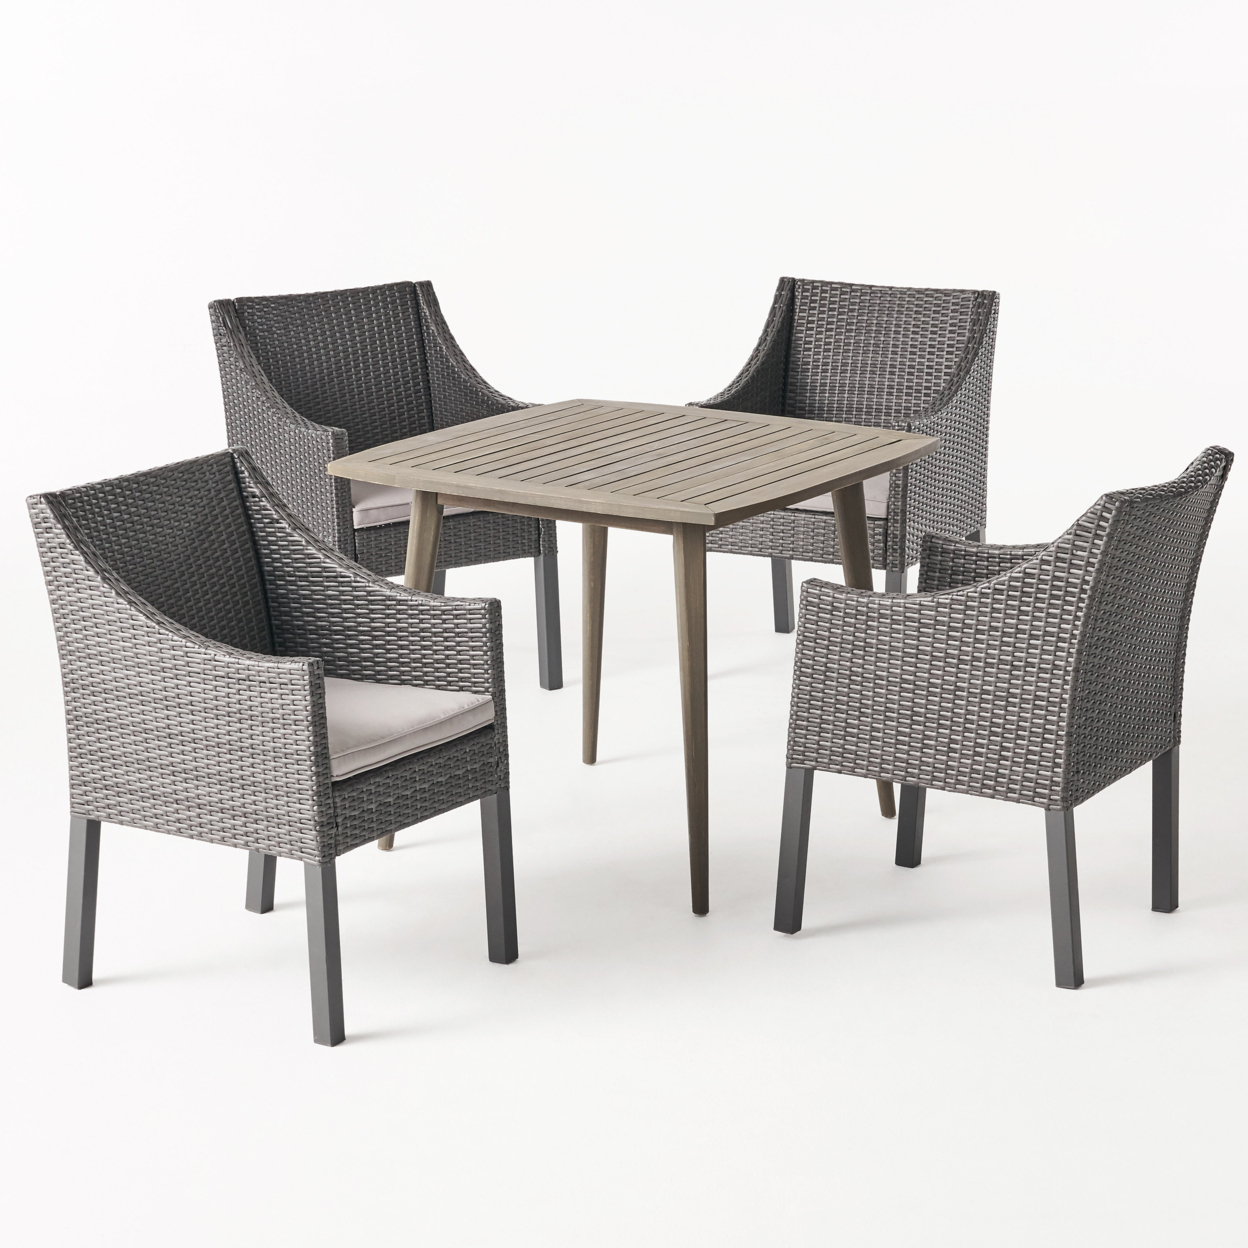 Keen Outdoor 5 Piece Wood And Wicker Dining Set, Gray And Gray